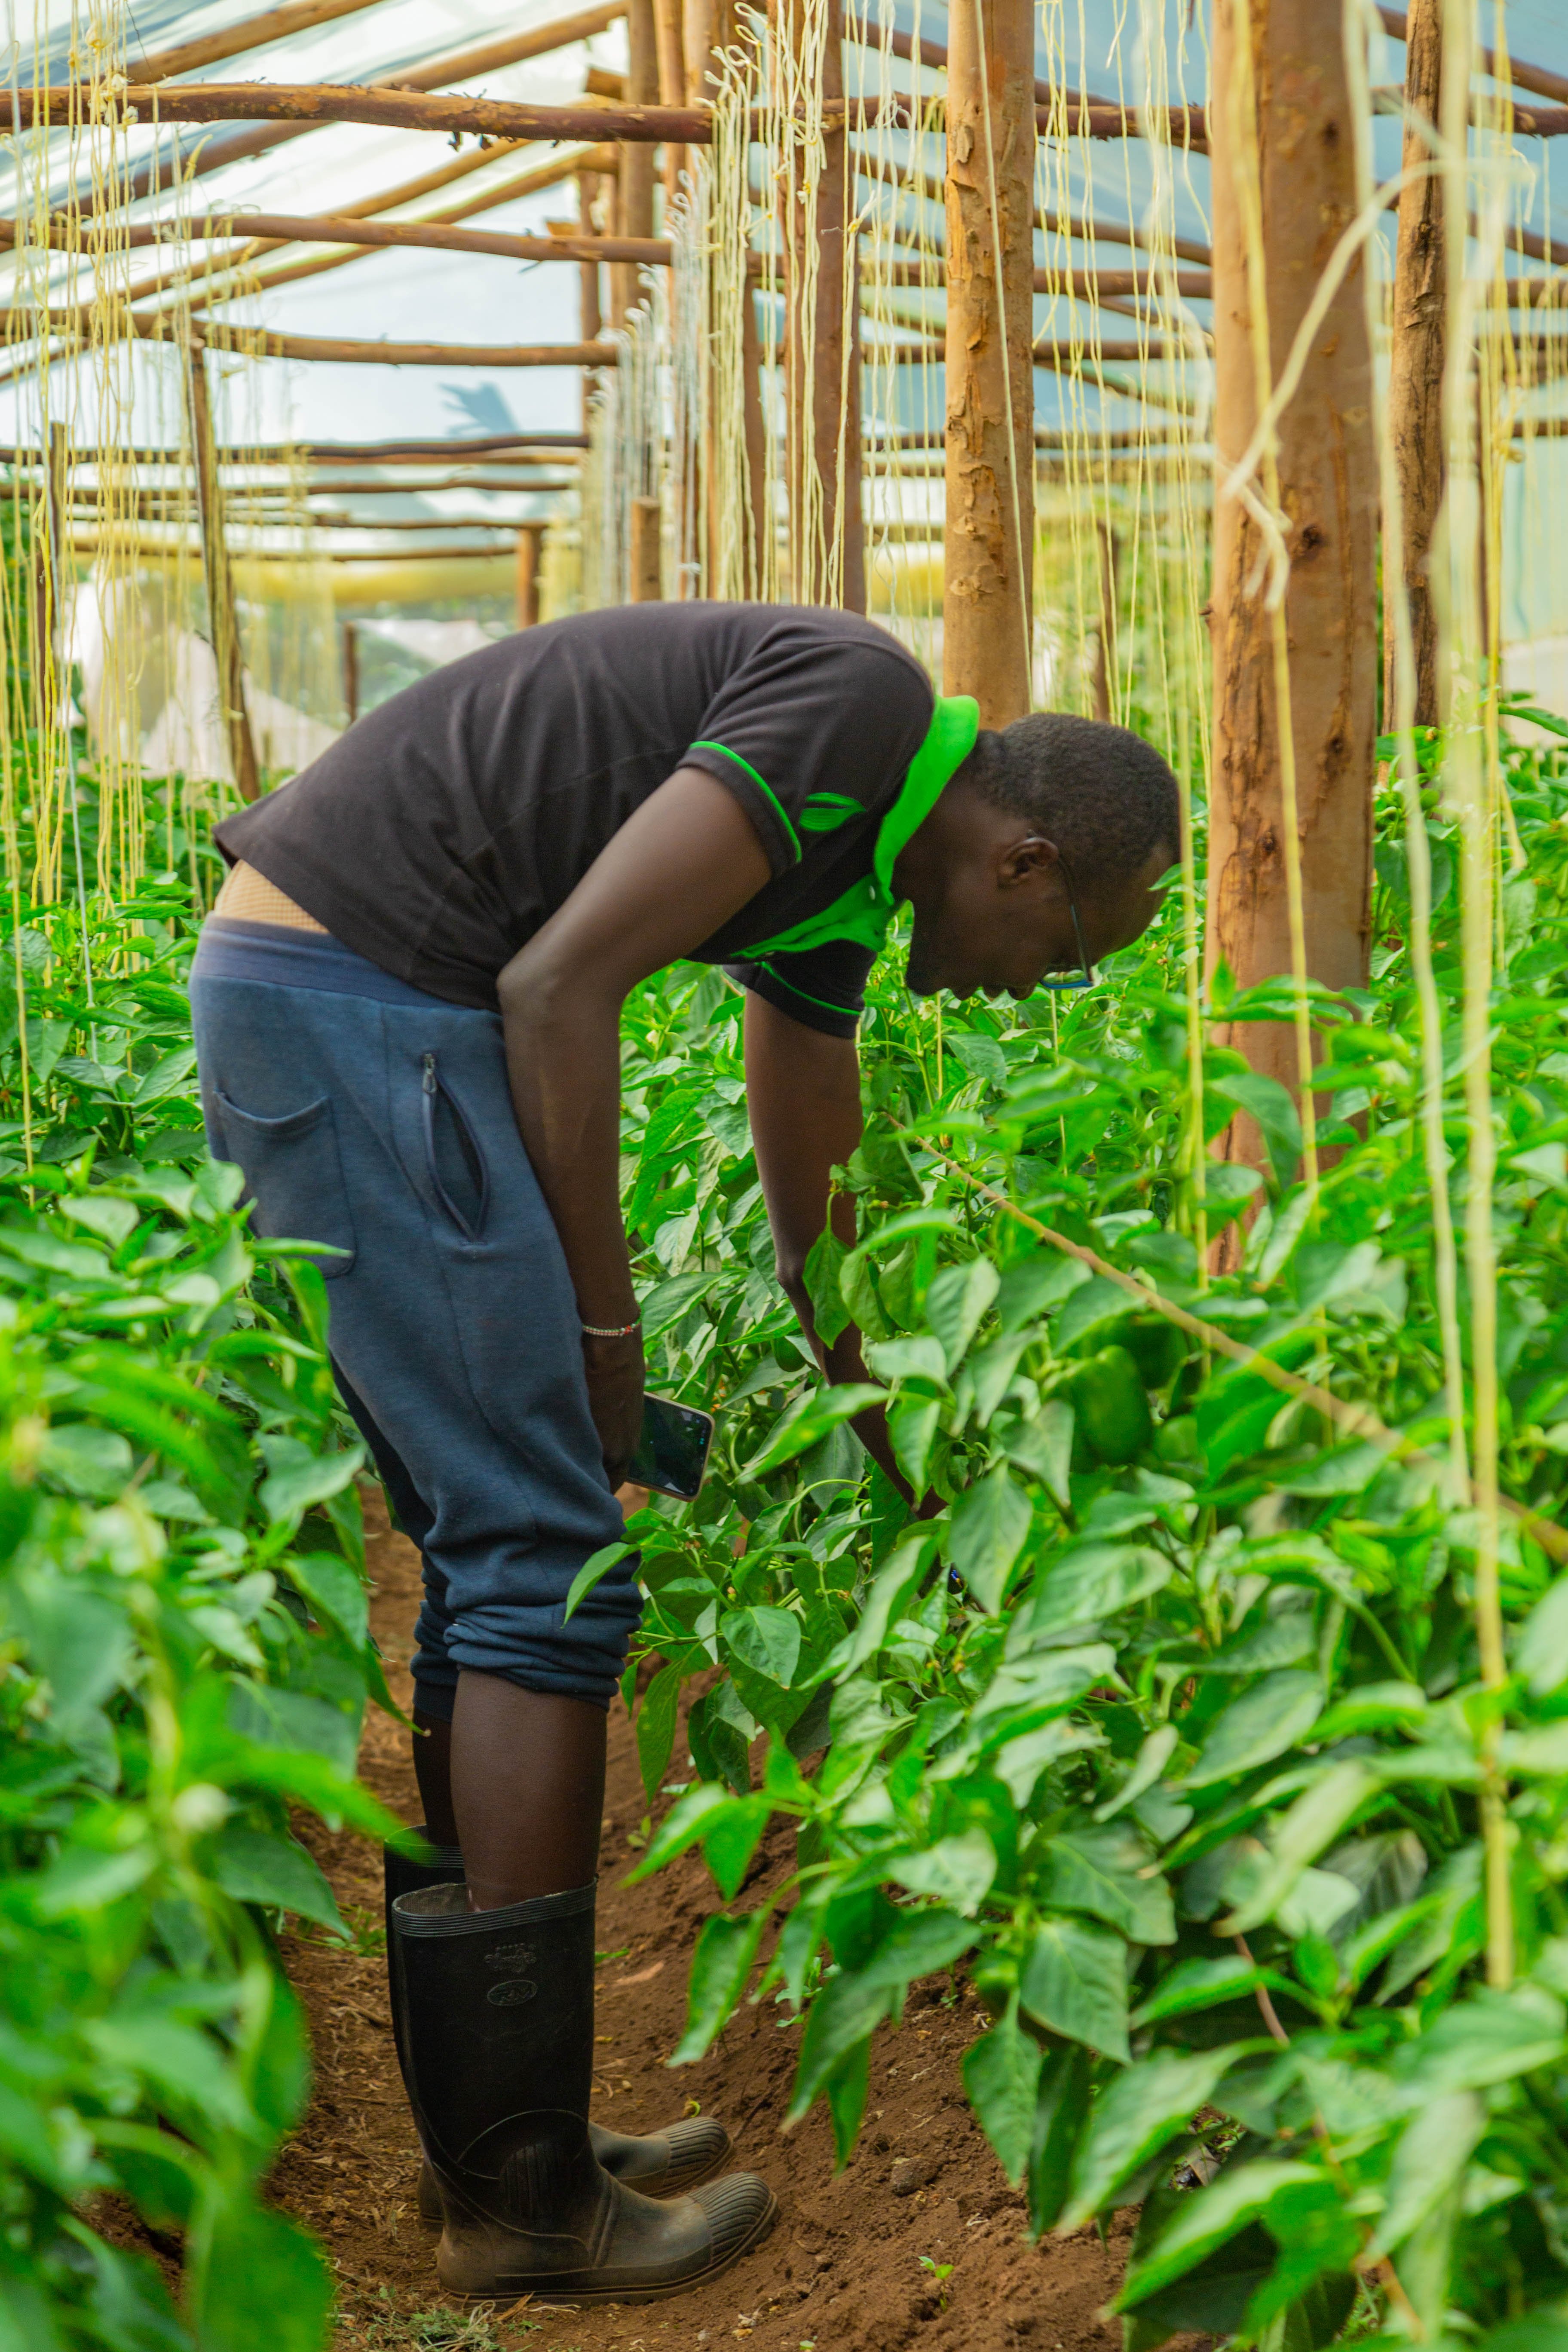 Capsicum farming in a greenhouse: Photo by Synnefa at the Kabarak Farm in Kenya